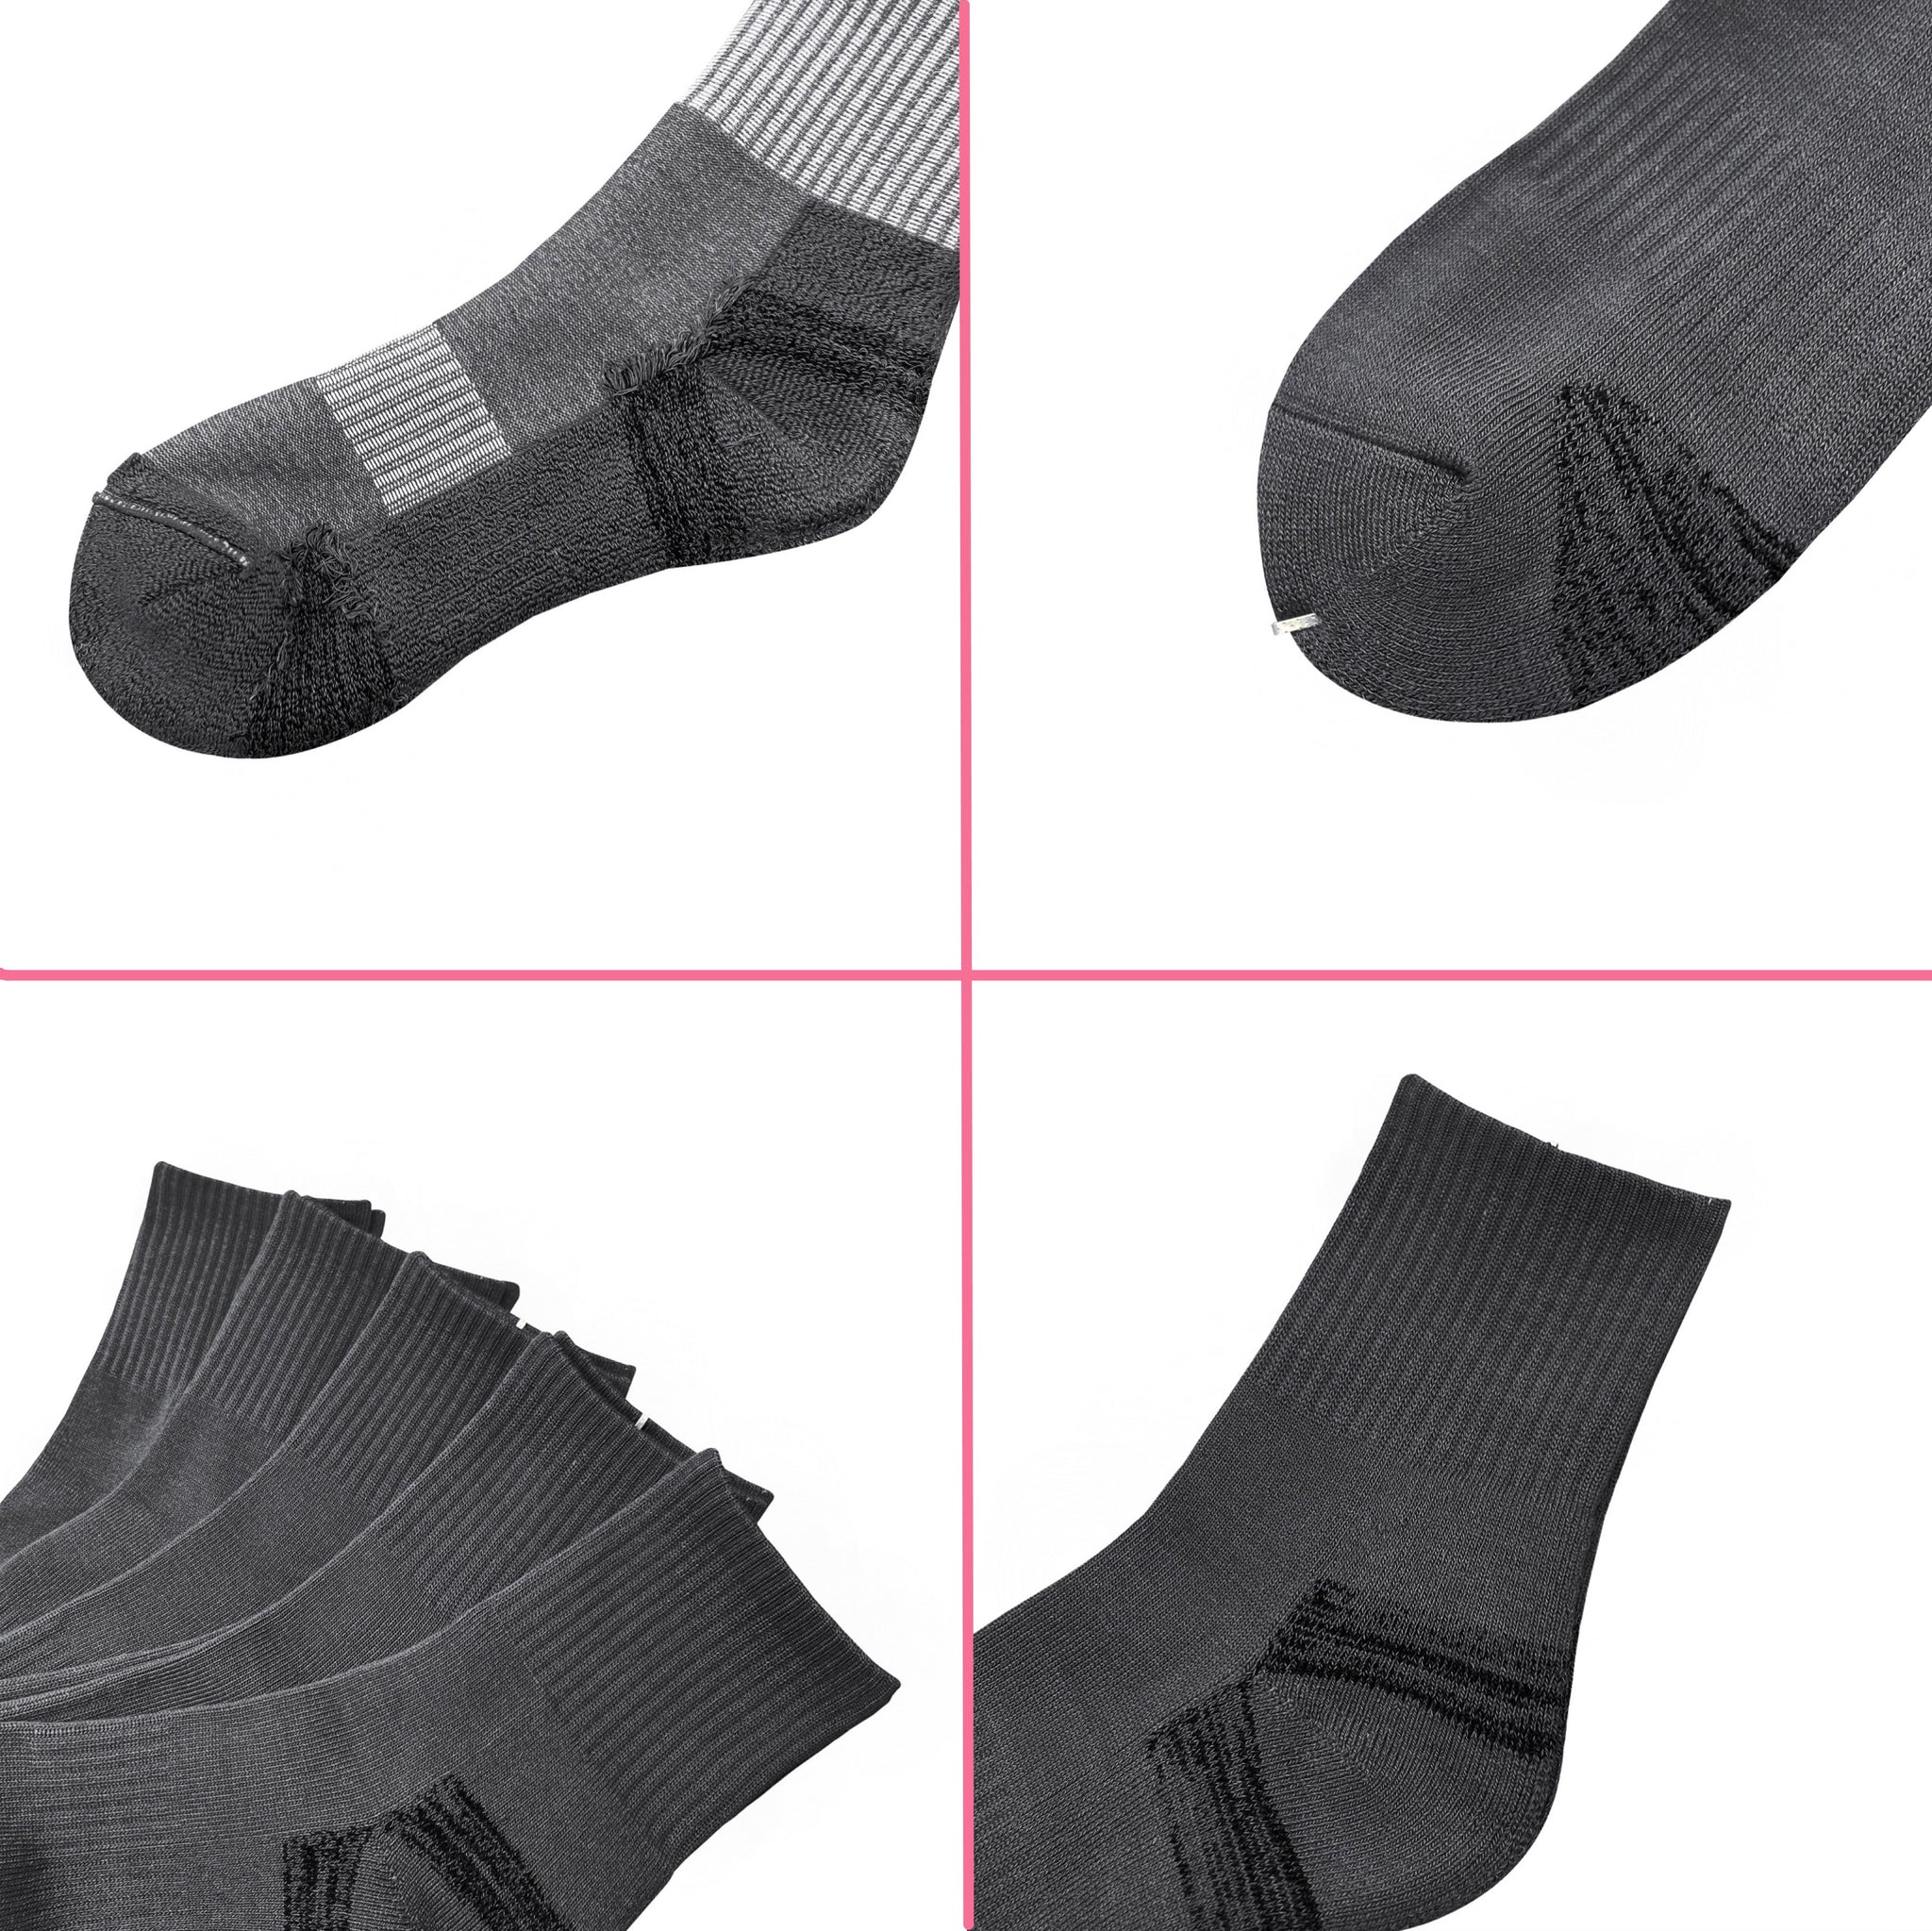 BIOAUM Men's Athletic Socks Size 10-13 - 6 Pairs Cotton Cushioned Quarter  Socks for Running, Workout, Work : : Clothing, Shoes & Accessories